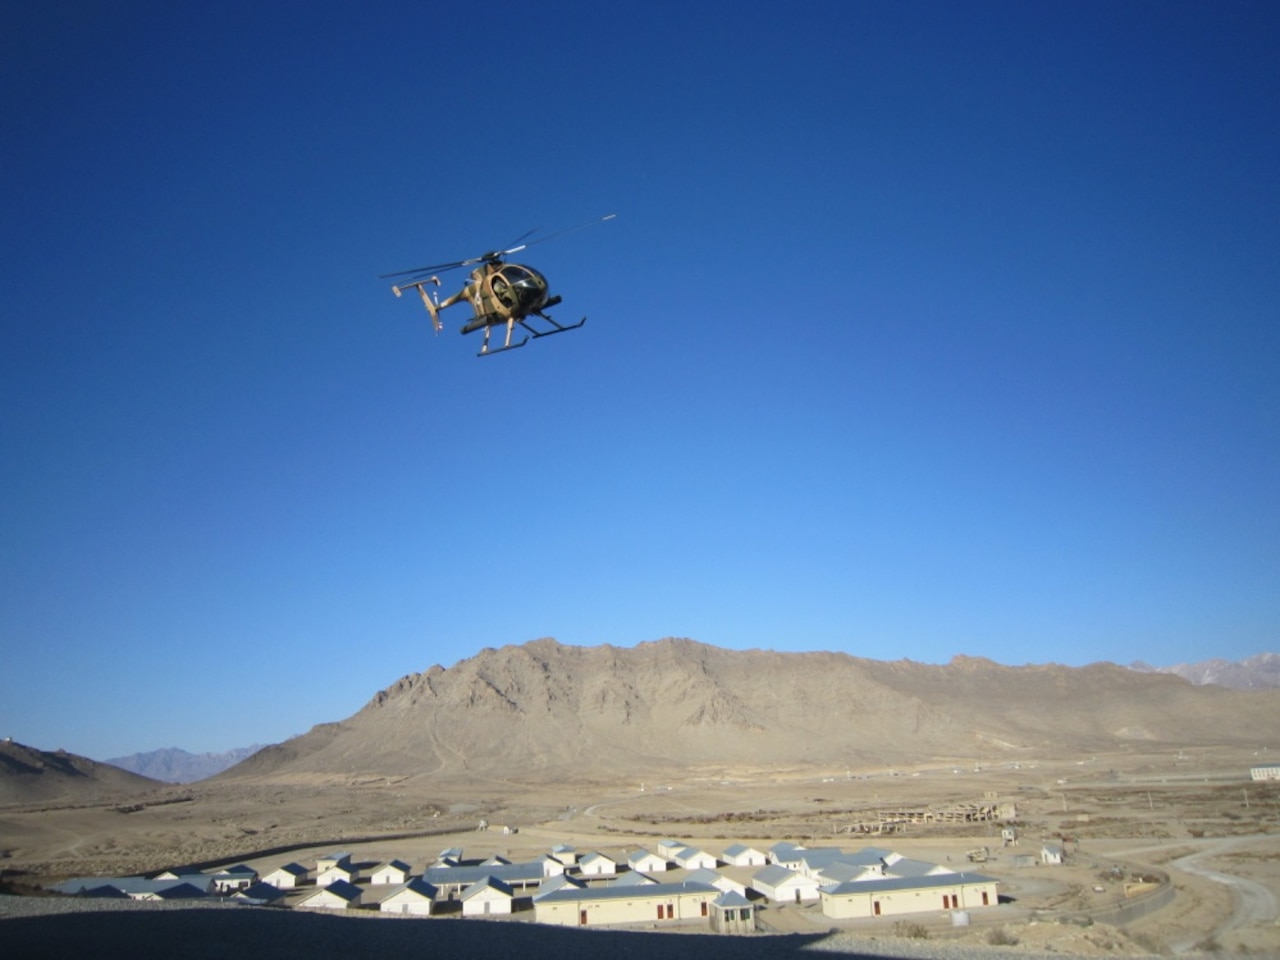 A Special Mission Wing helicopter delivers Crisis Response Unit 222 operators to the target during an exercise at the military training center in Kabul, Afghanistan, Feb. 3, 2018. The exercise tested the ability of the special operators to conduct rapid mission planning and execution in a condensed time period. NATO Special Operations Component Command-Afghanistan photo by Lashawn Sykes